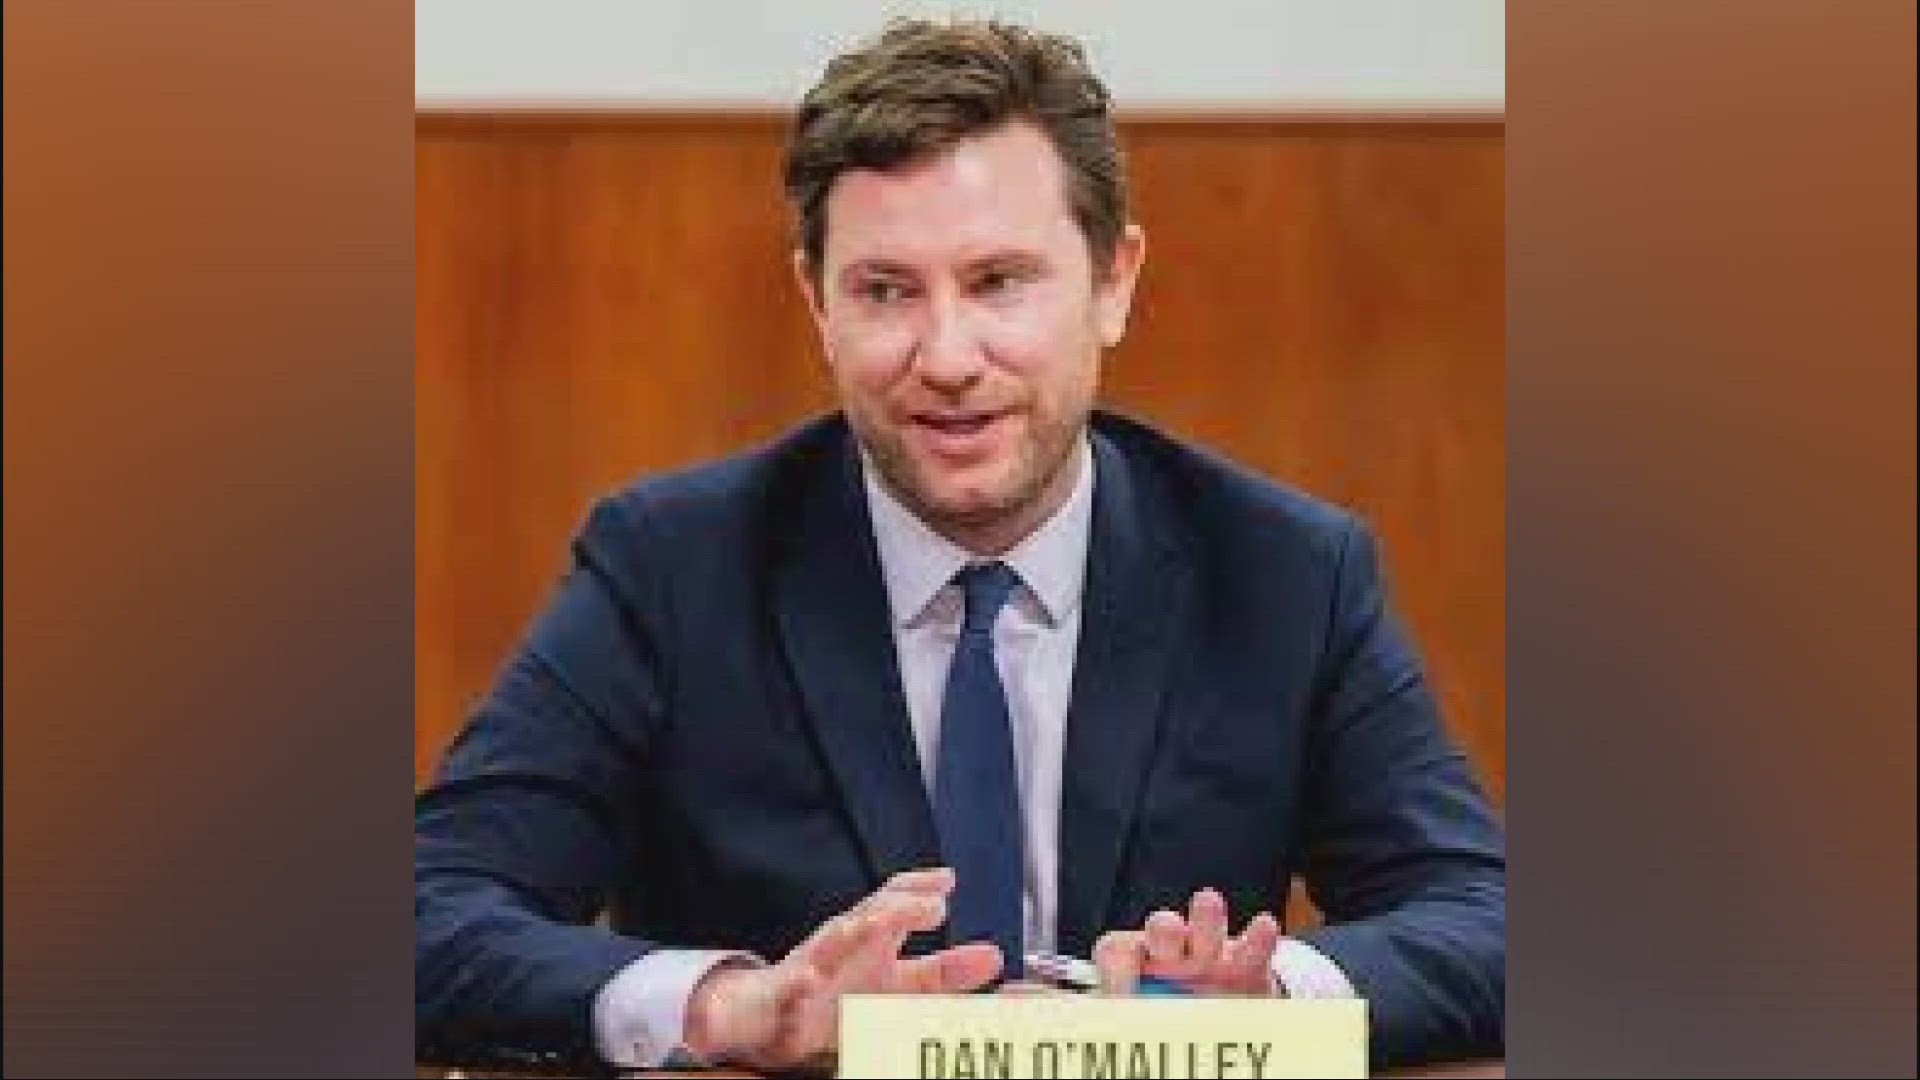 The attorney for Dan O'Malley tells 3News that his client's removal 'was motivated by personal agendas.'